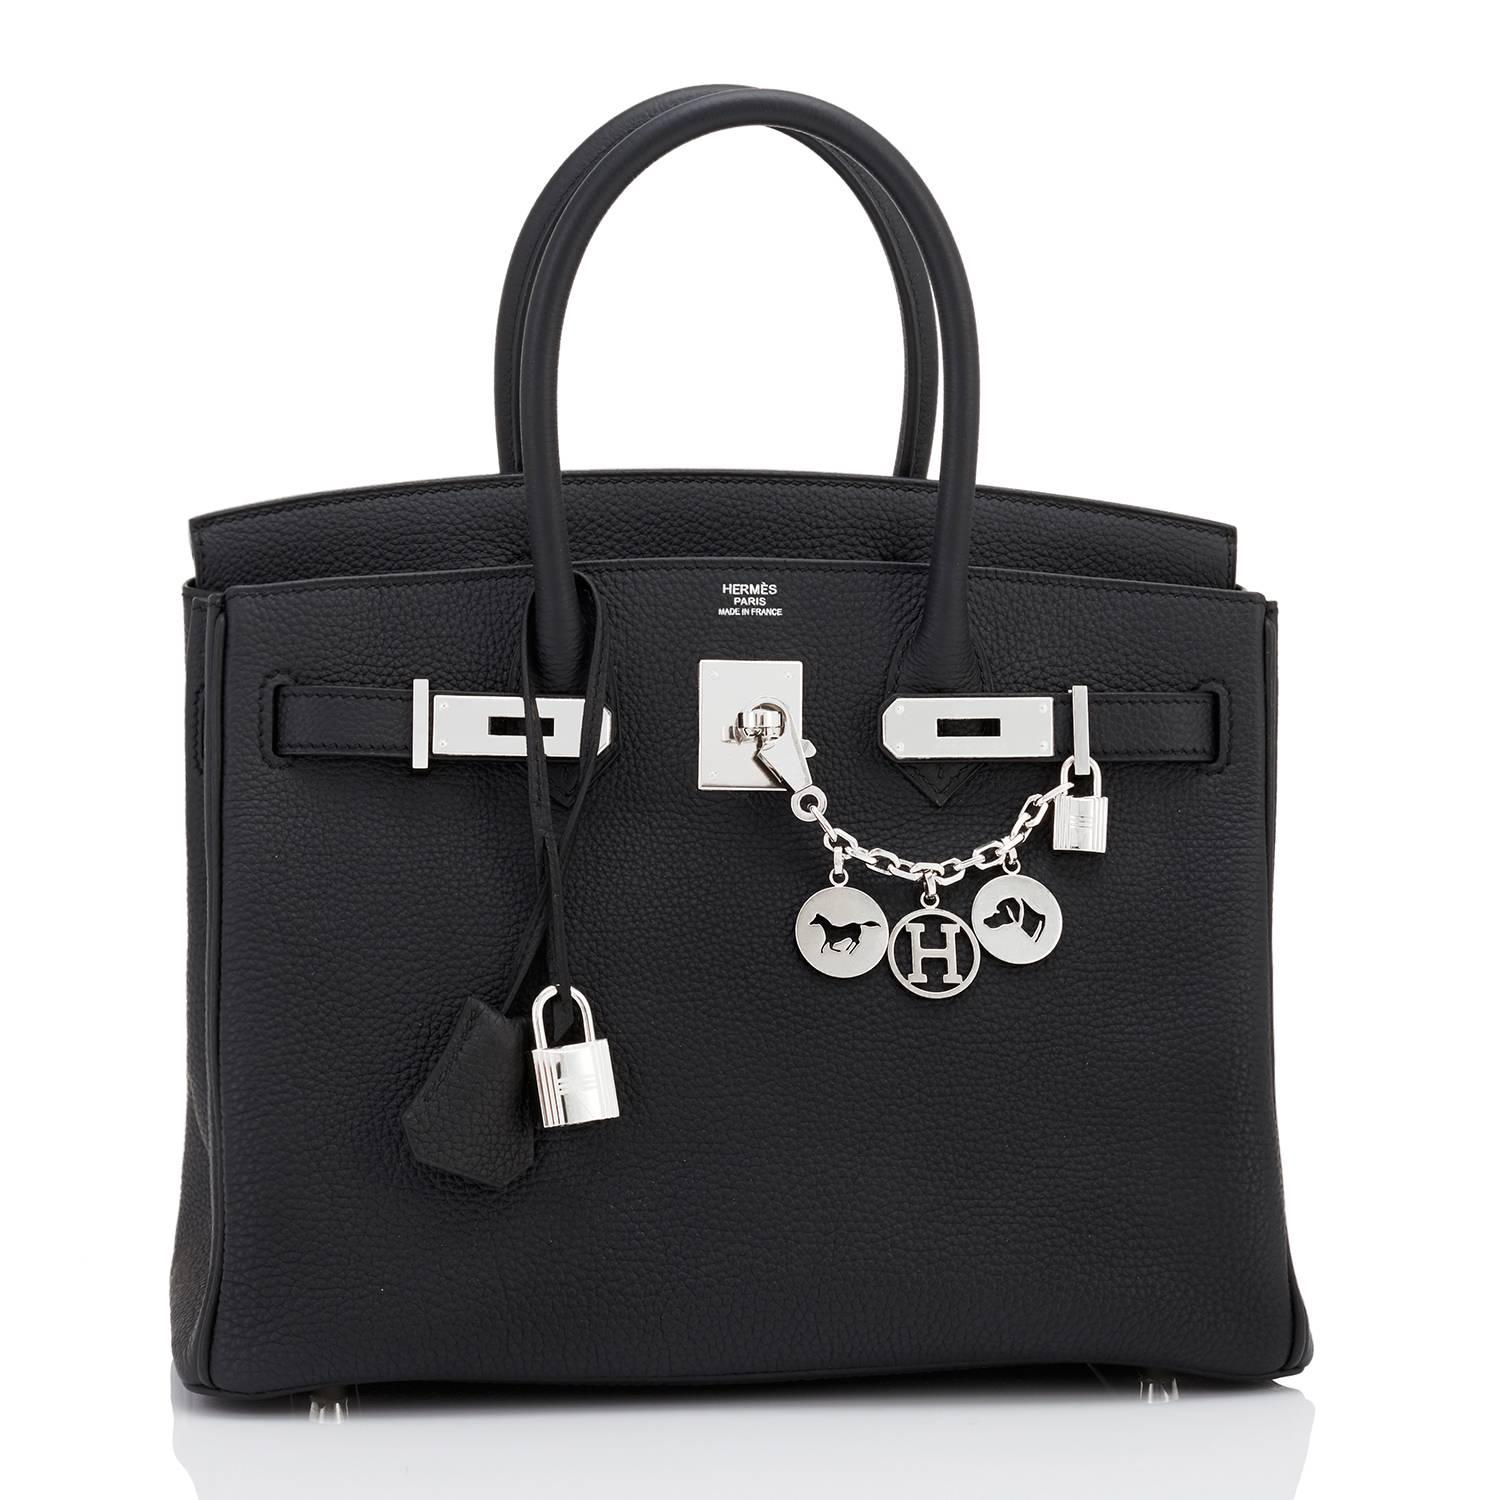 Hermes Black Togo 30cm Birkin Palladium Hardware Leather Bag 
Brand New in Box. Store fresh. Pristine condition (with plastic on hardware)
Just purchased from Hermes store; bag bears new 2017 interior A stamp.
Perfect gift!  Comes with keys, lock,